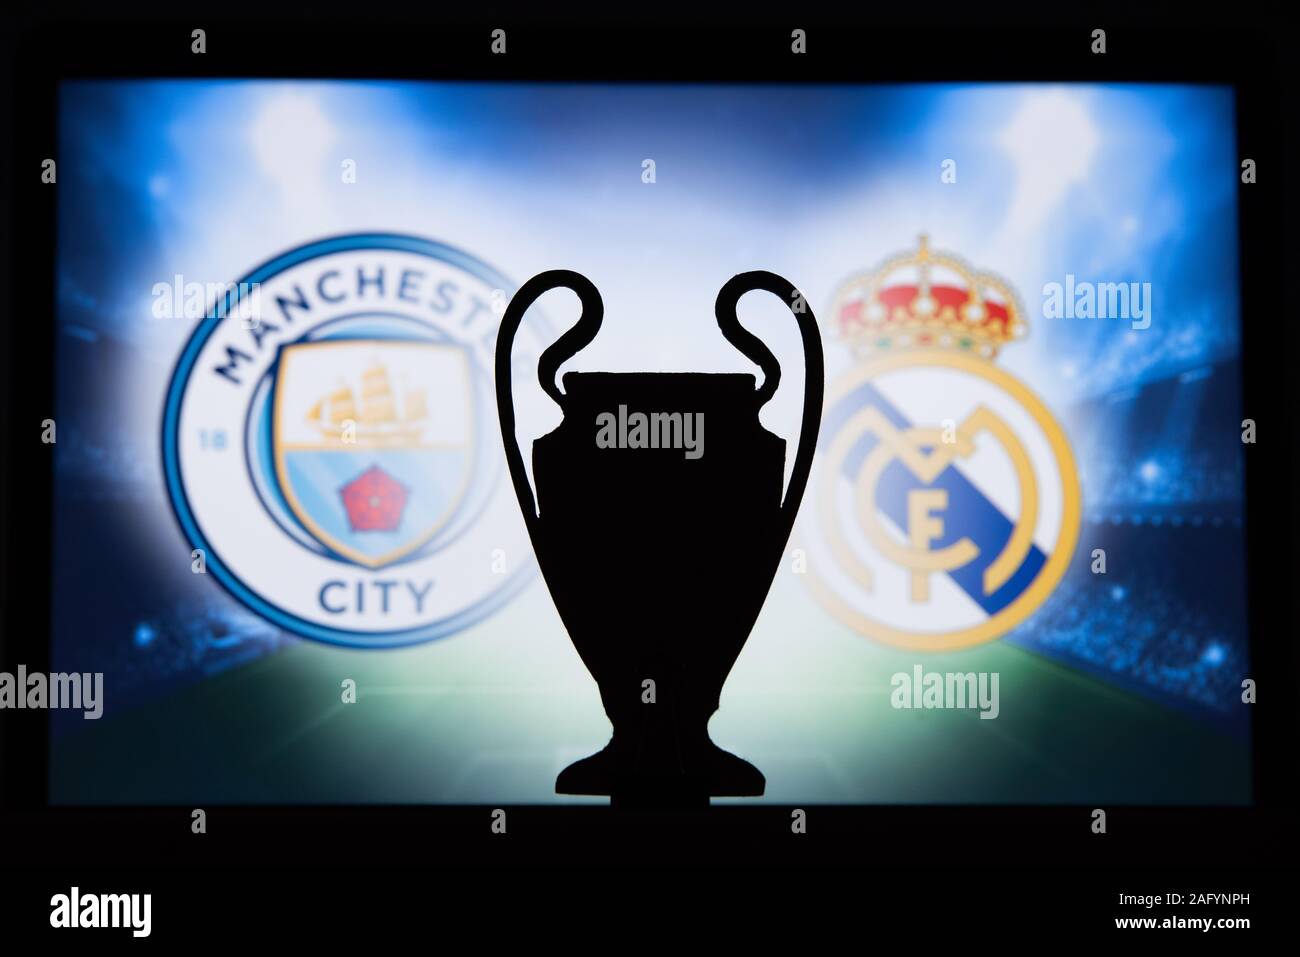 UEFA Champions League 2020, Round of 16 UCL football, Knockout stage,  playoff, Official Adidas soccer ball 2020 Stock Photo - Alamy